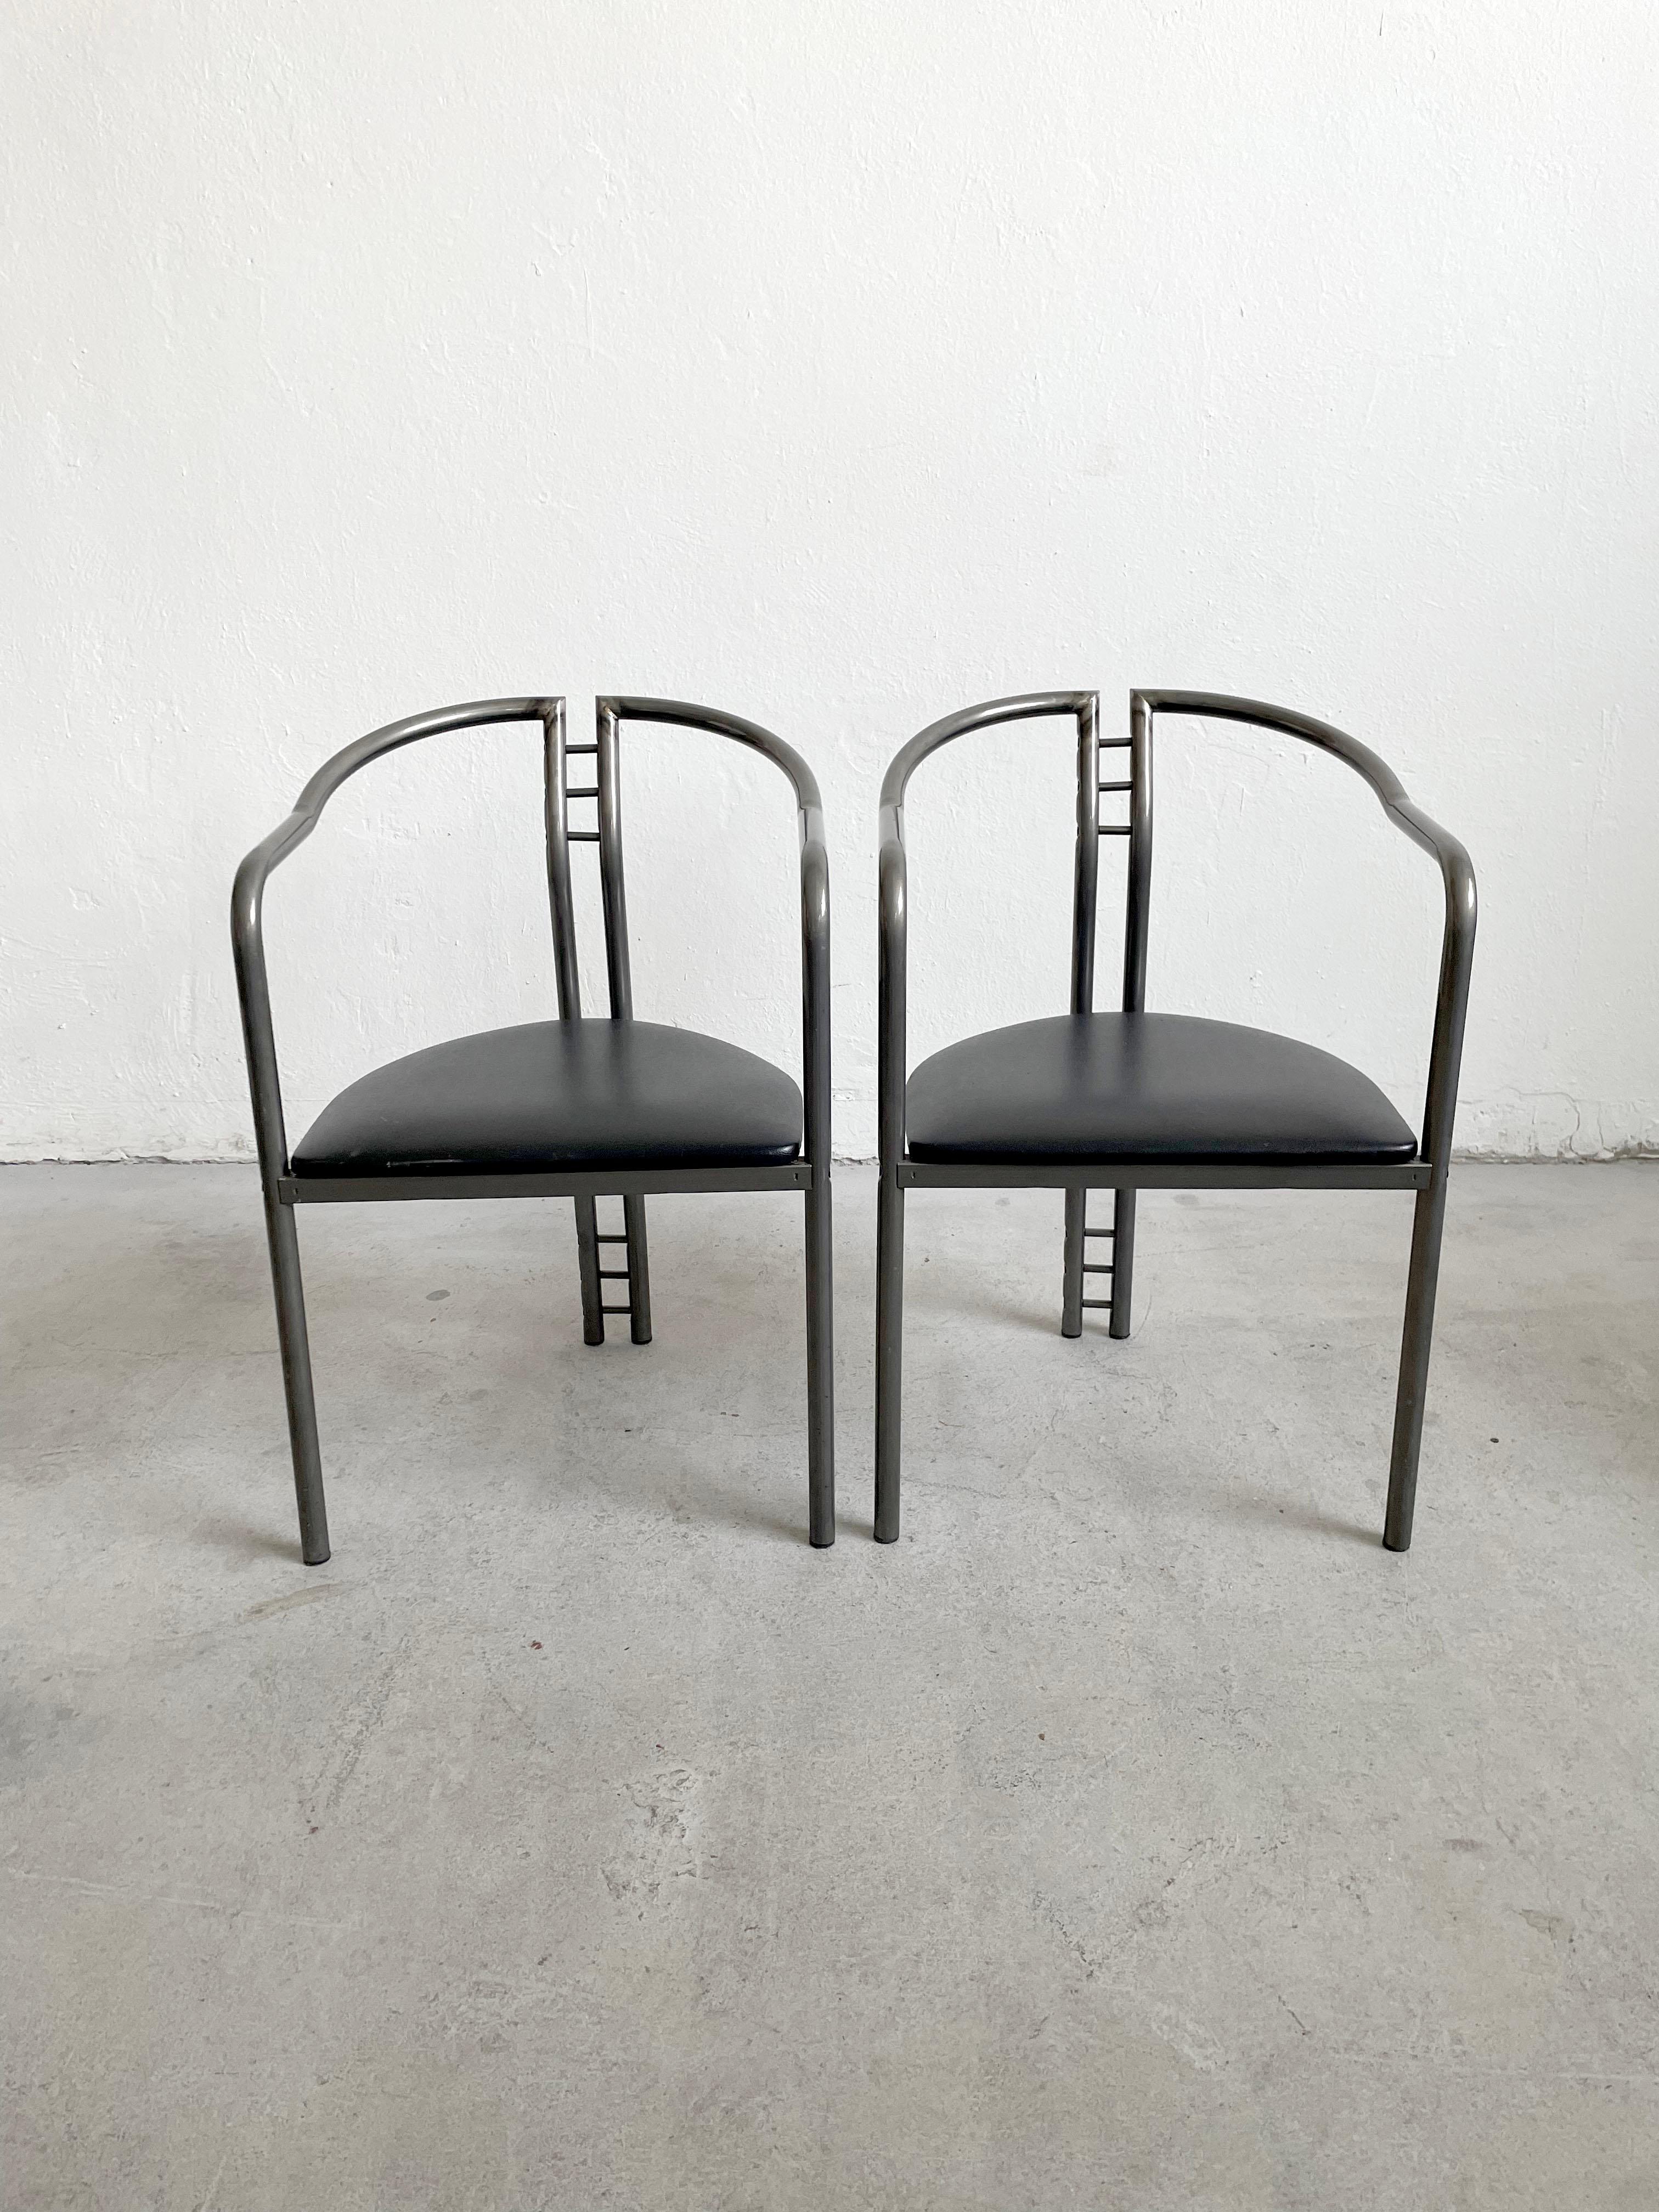 Set of 4 Postmodern Dining Chairs, Belgium 1980's For Sale 2